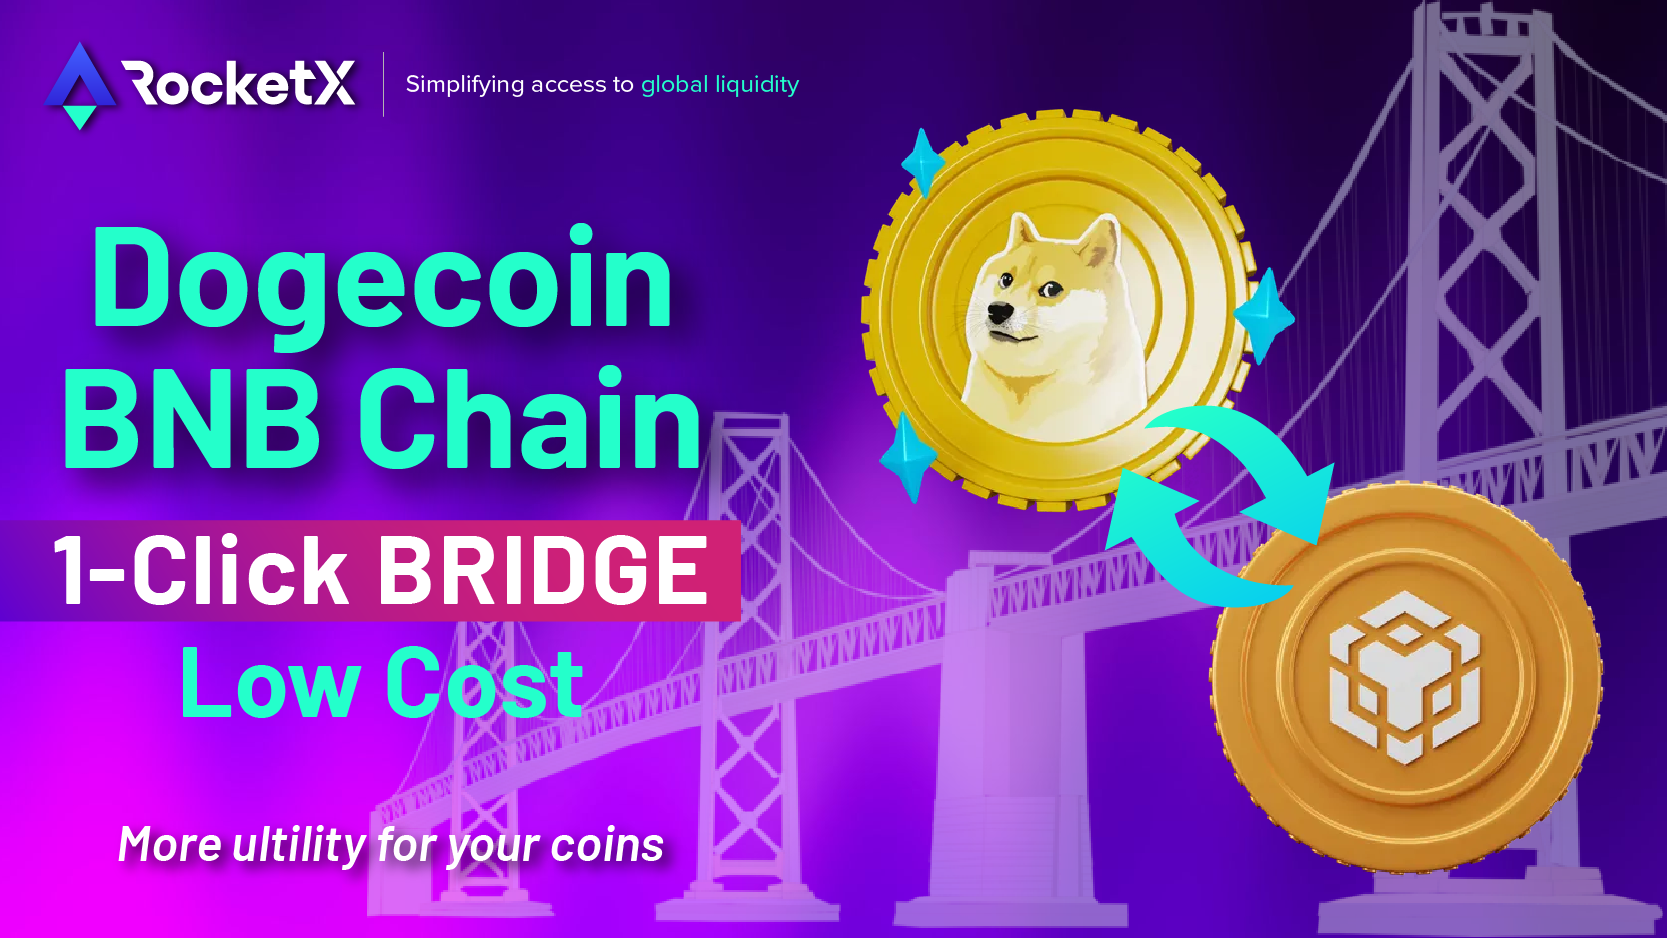 Want to transfer or bridge DOGE from Dogecoin to BNB chain. RocketX has the best Dogecoin bridge.